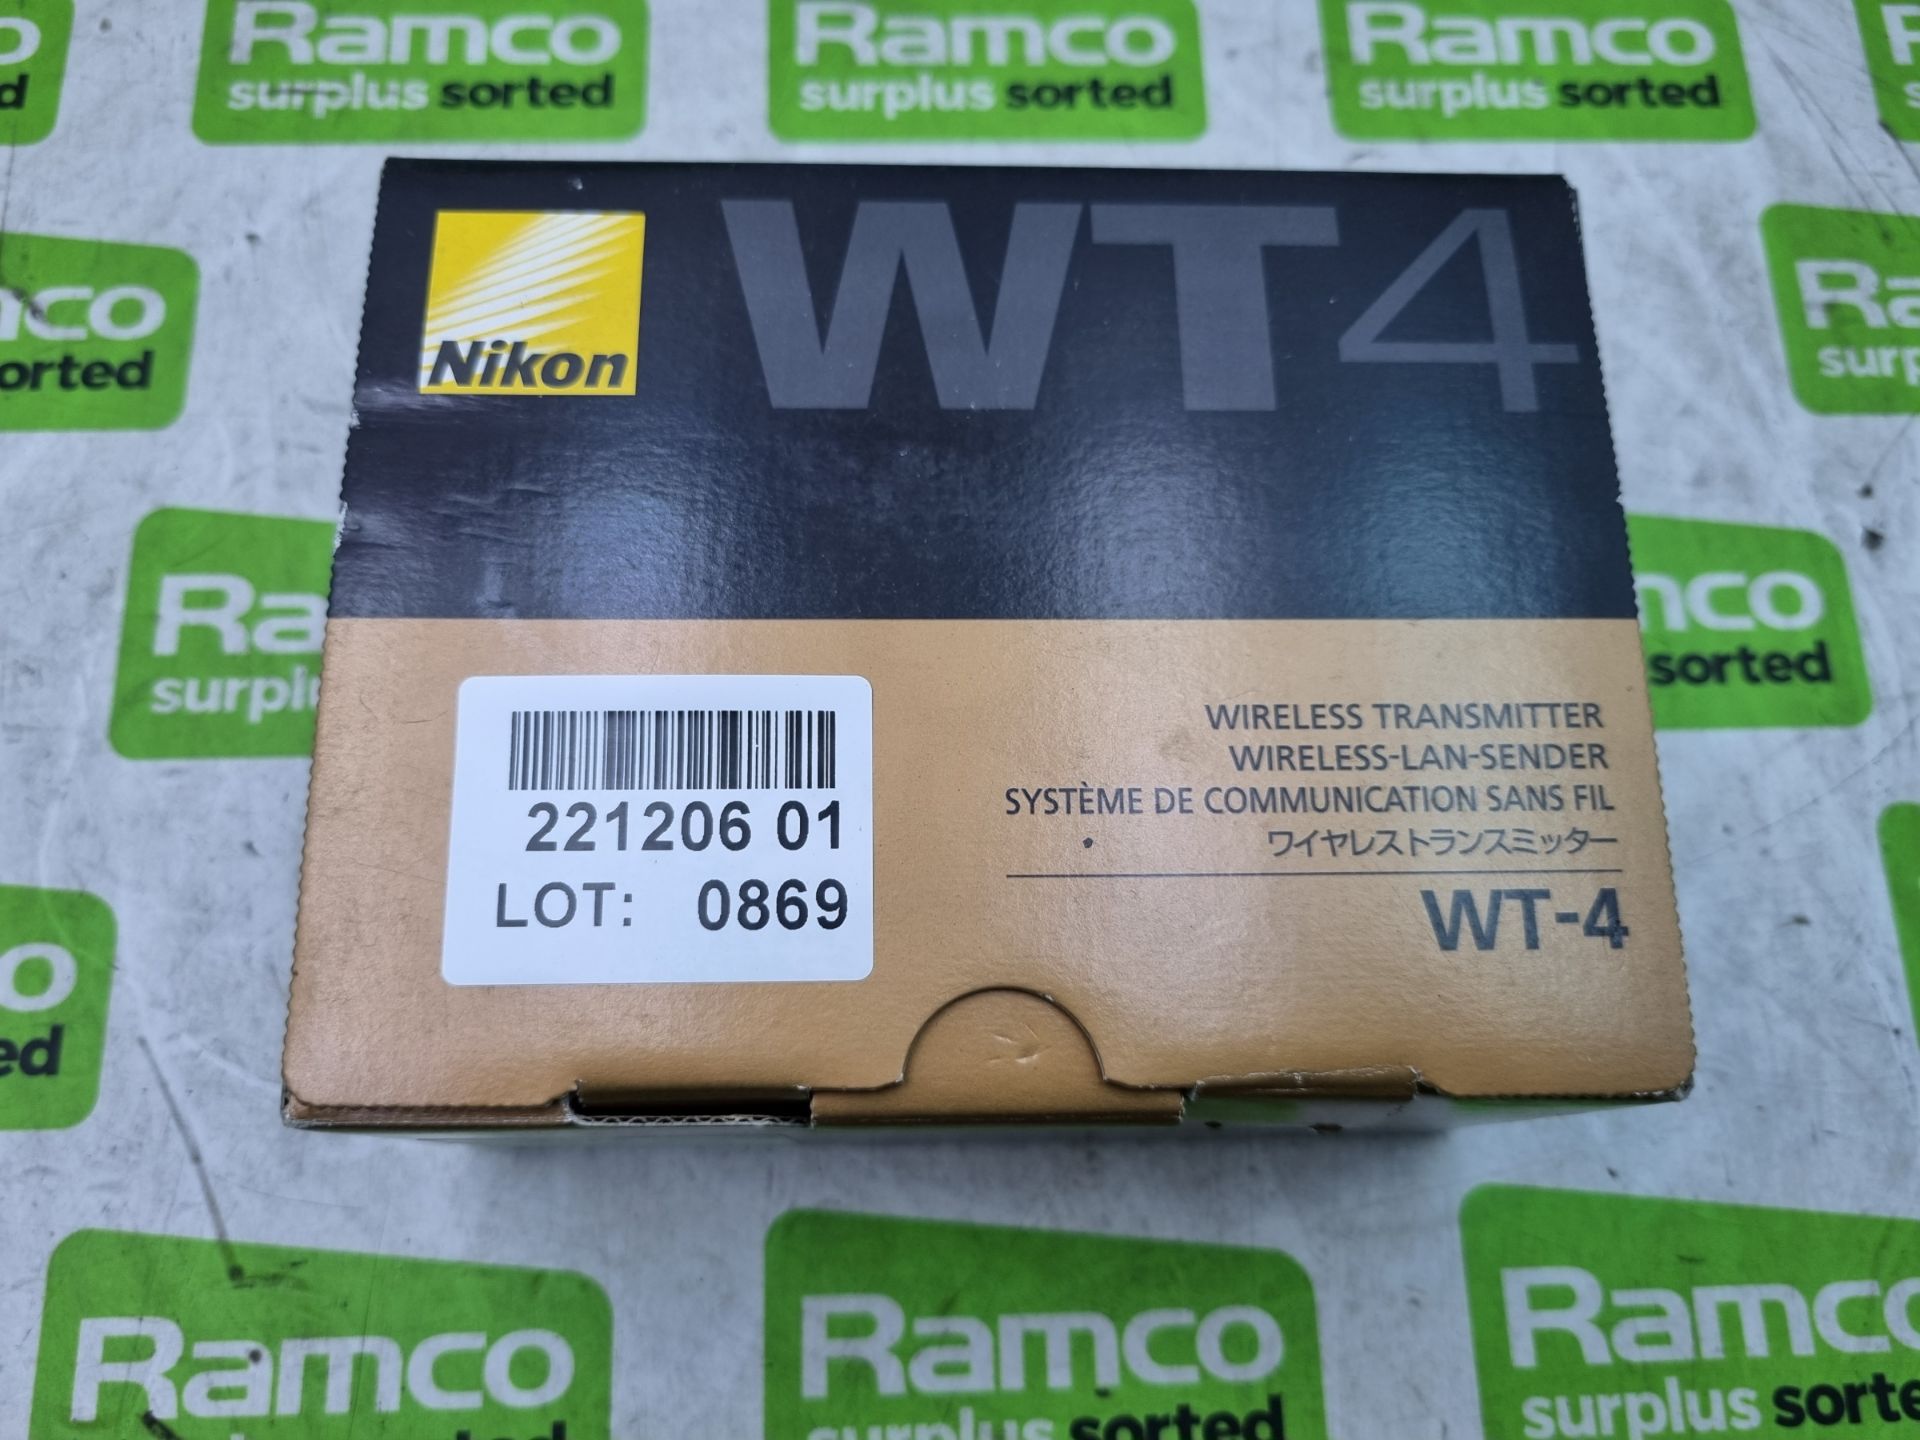 Nikon WT-4 wireless transmitter with case - Image 6 of 6